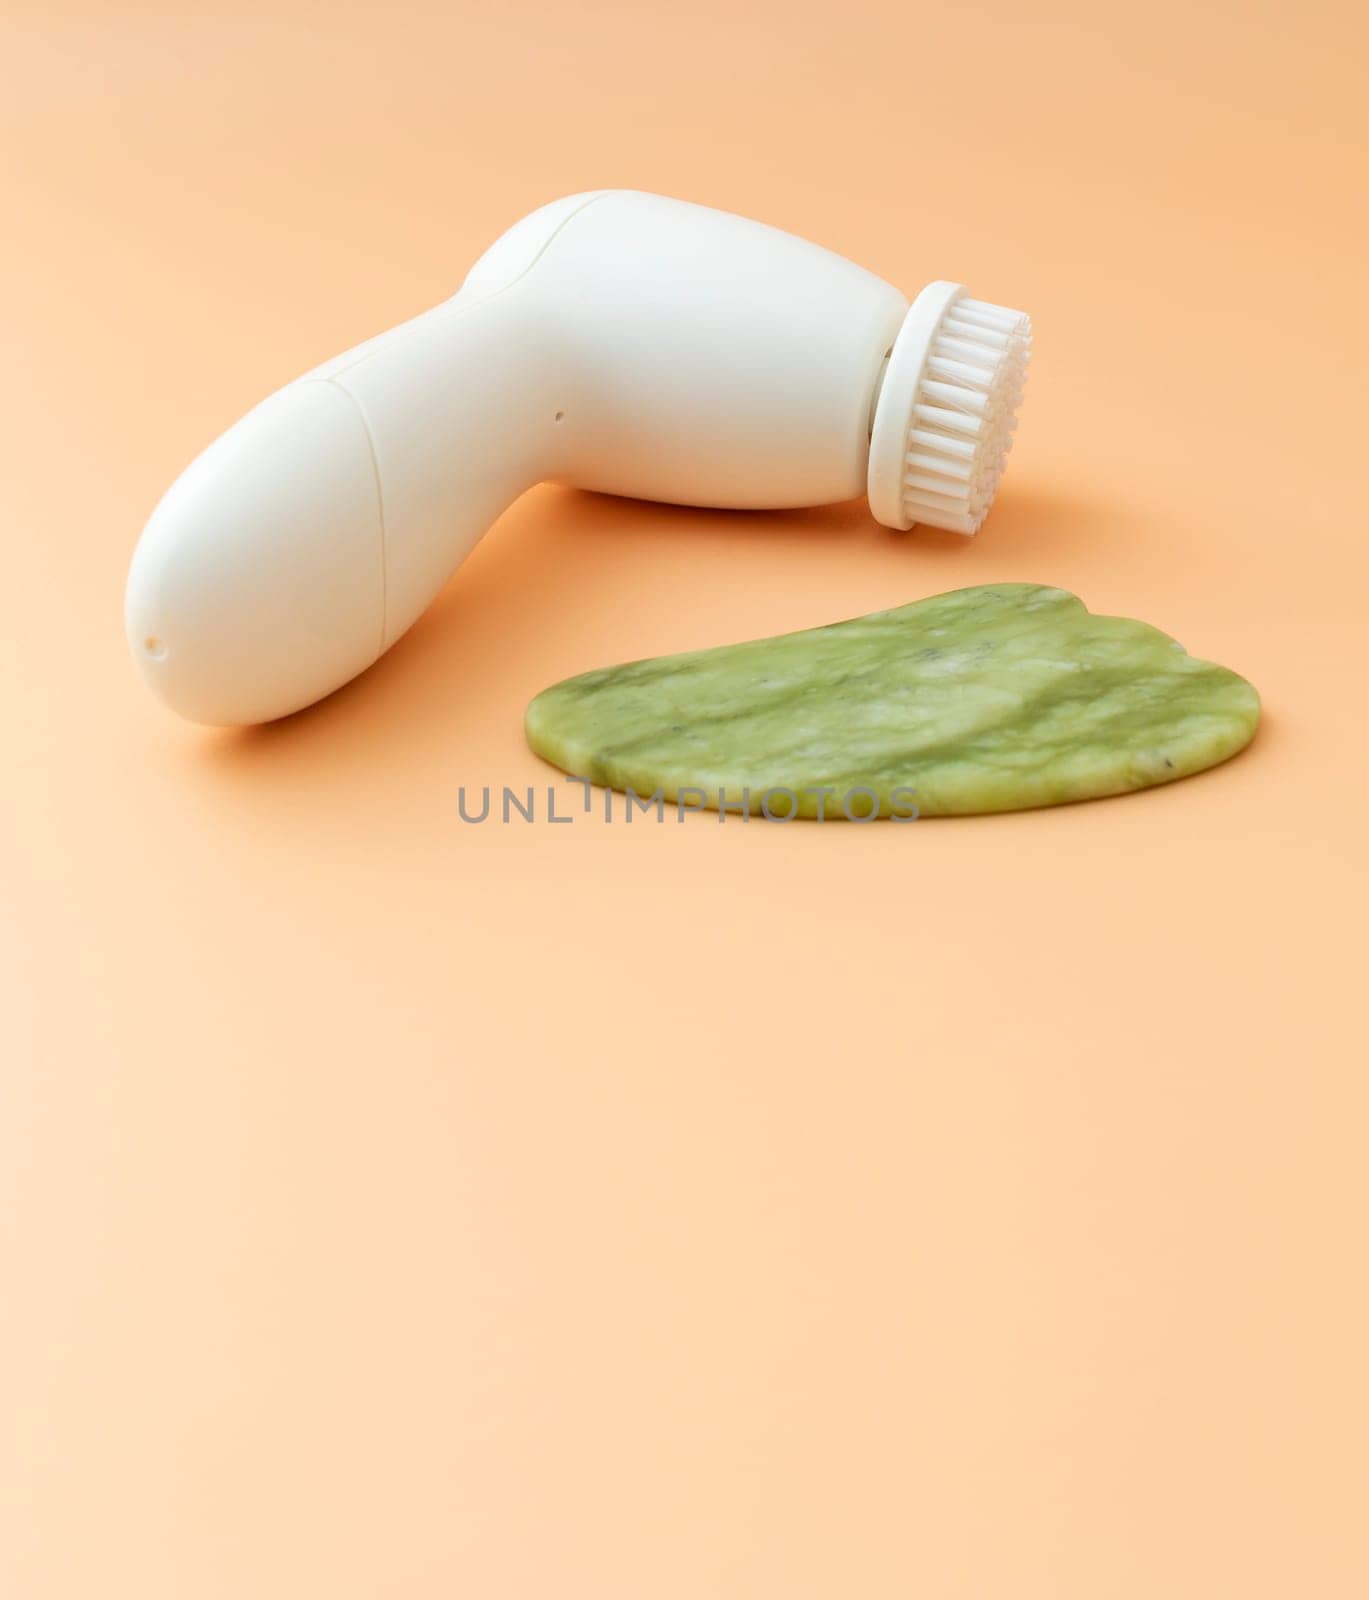 Flatly Mockup Skin Care Products. Facial Tool Gua Sha, Anti-Aging, Facial Cleansing Brush on Beige Background. Skin Beauty Device, Copy Space For Text. Vertical